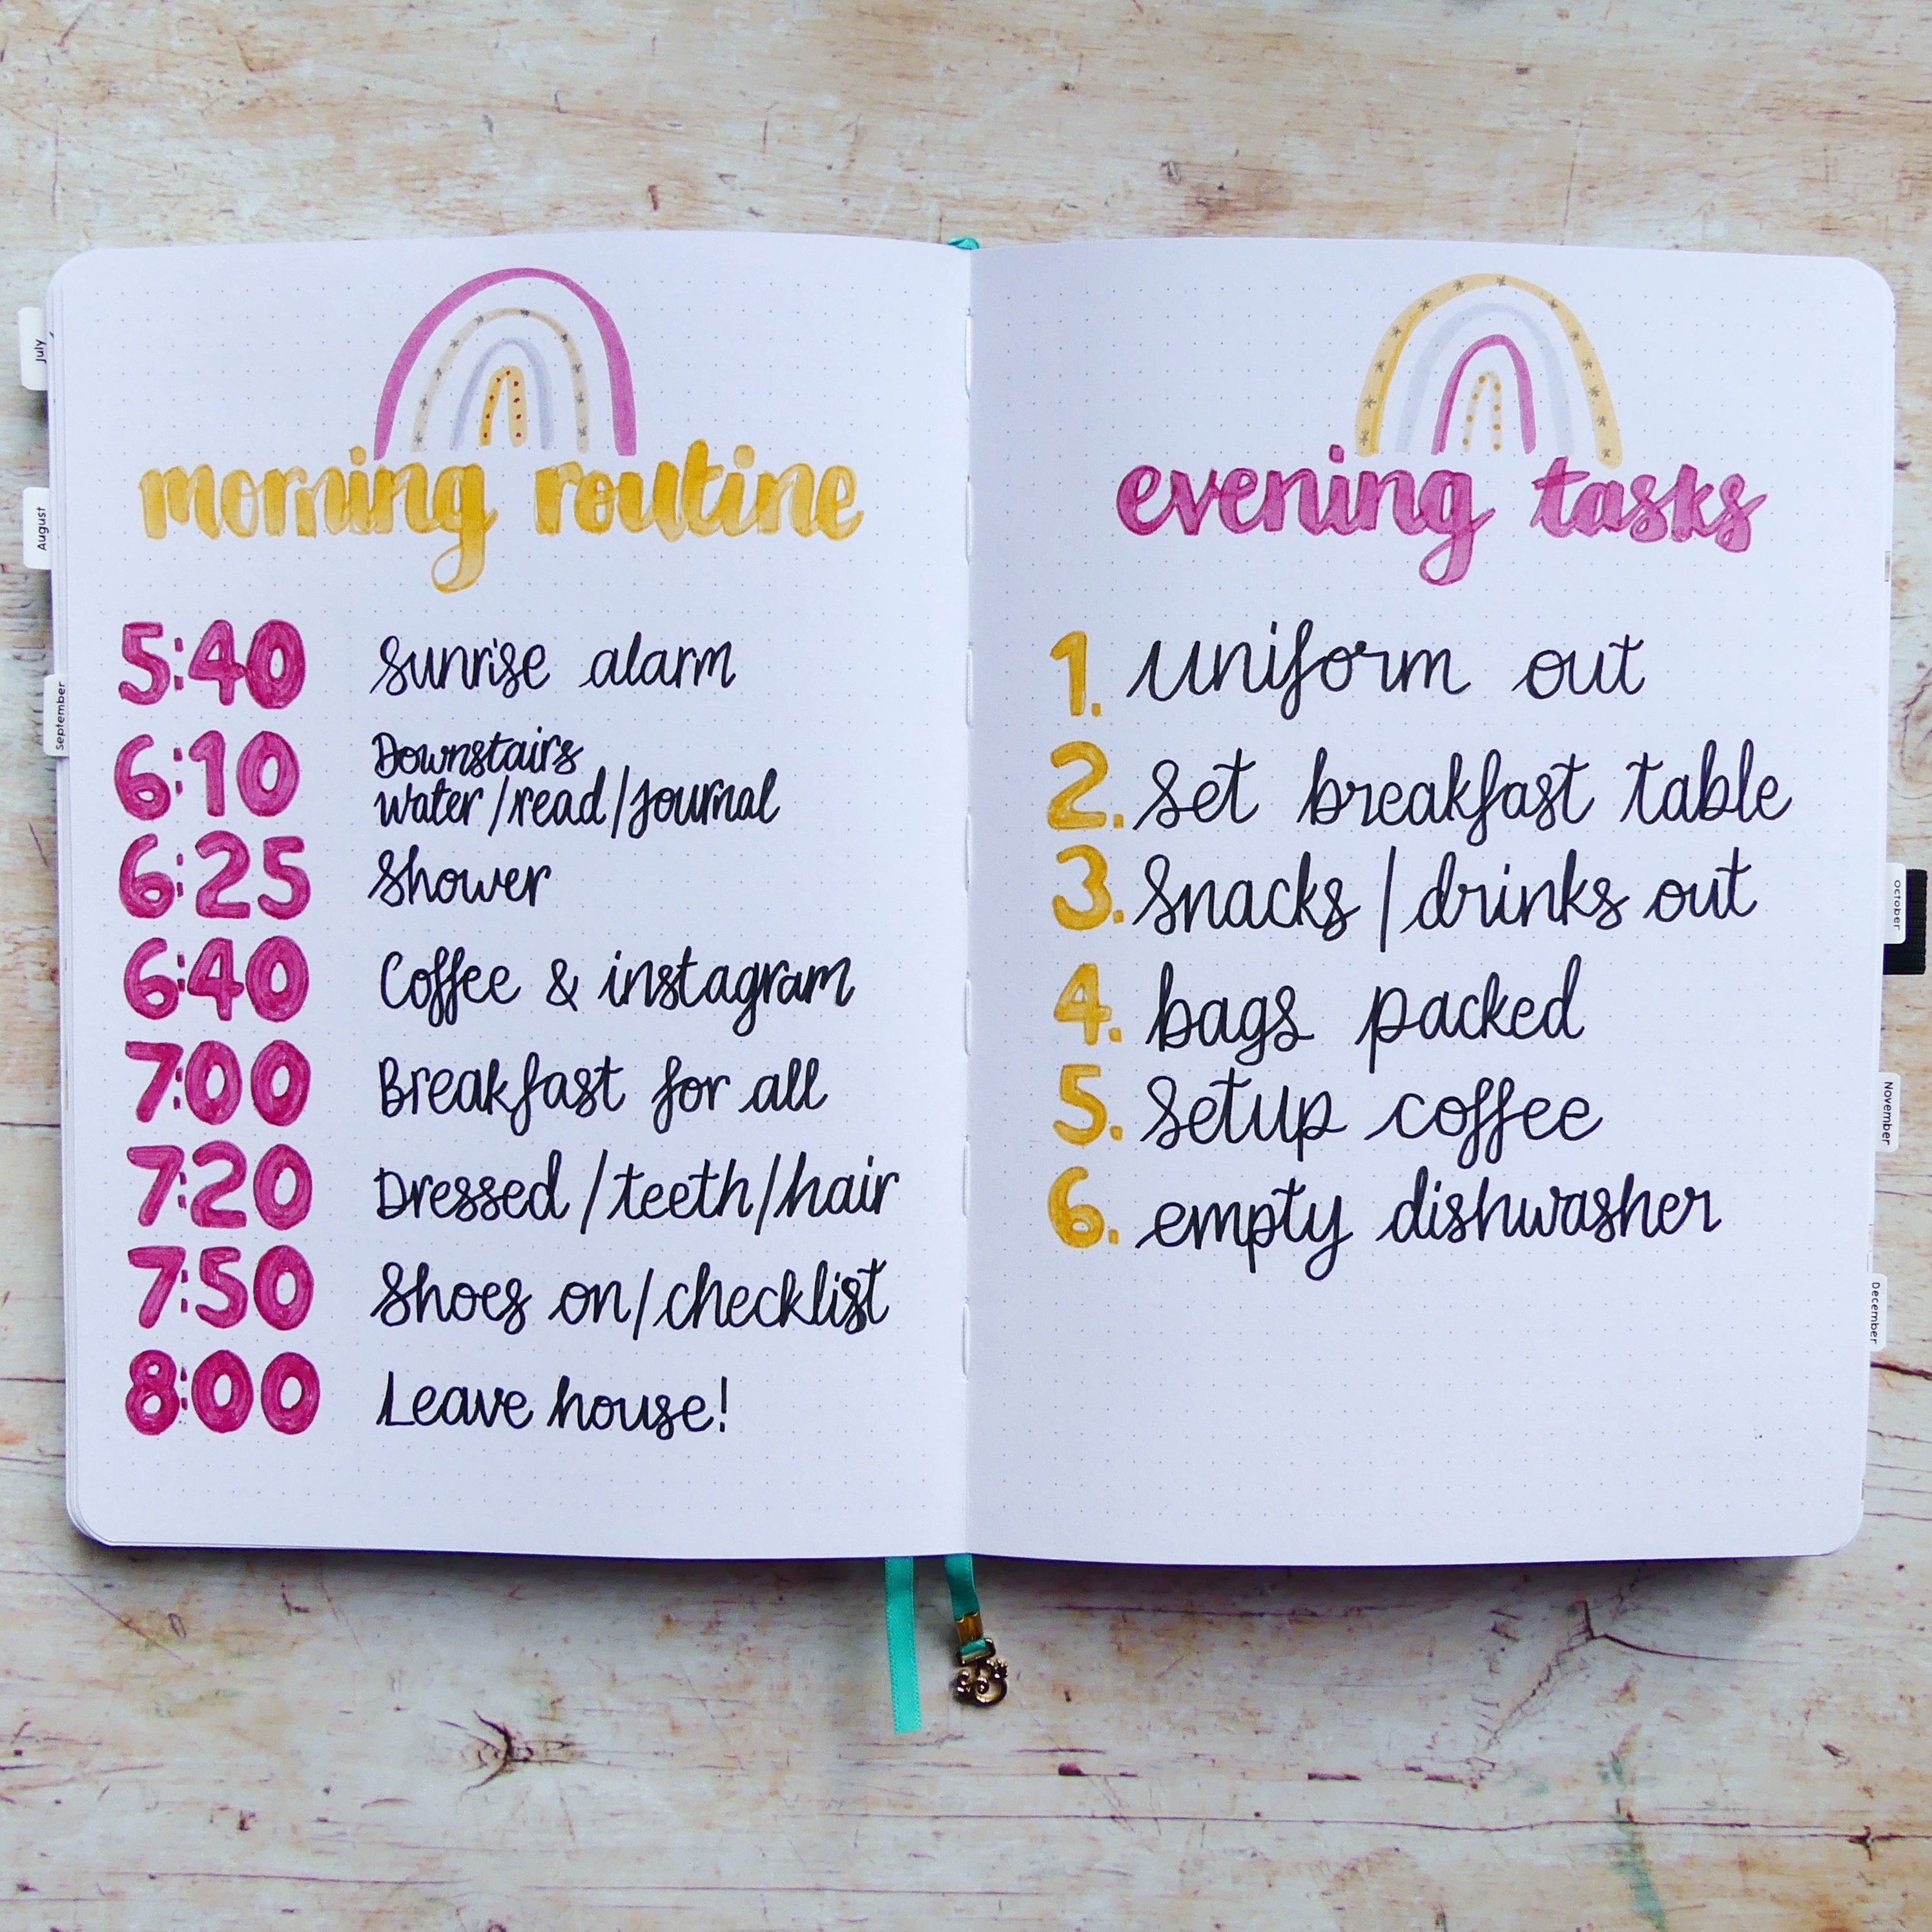 Double page spread with routines for morning and evening including specific timings 